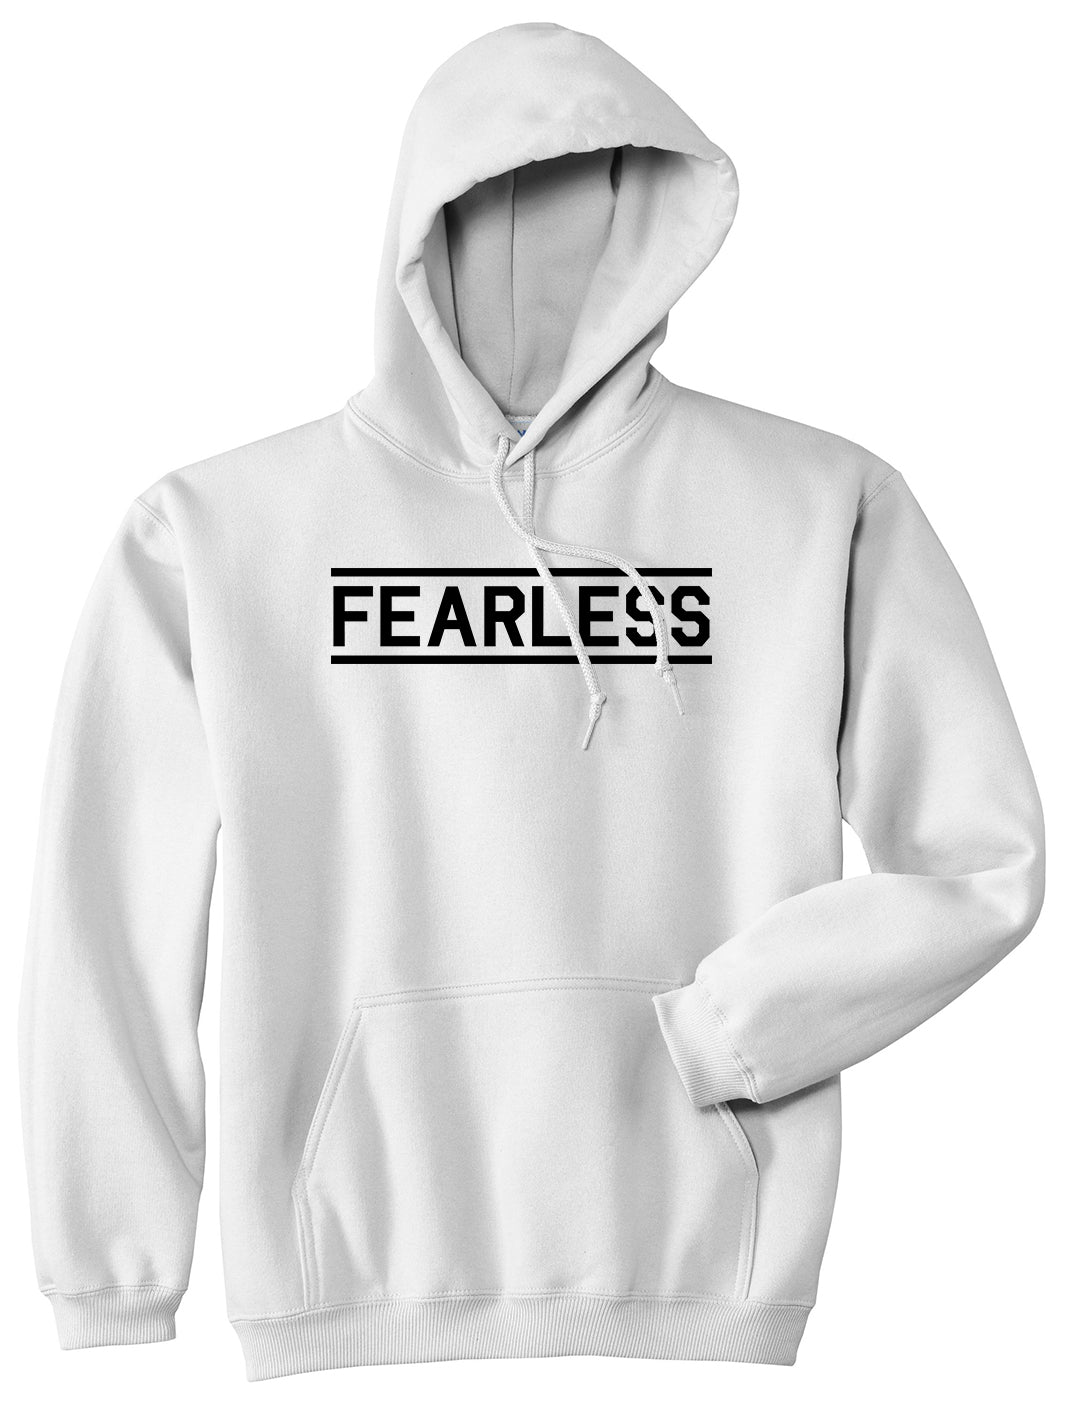 Fearless Gym Mens White Pullover Hoodie by KINGS OF NY